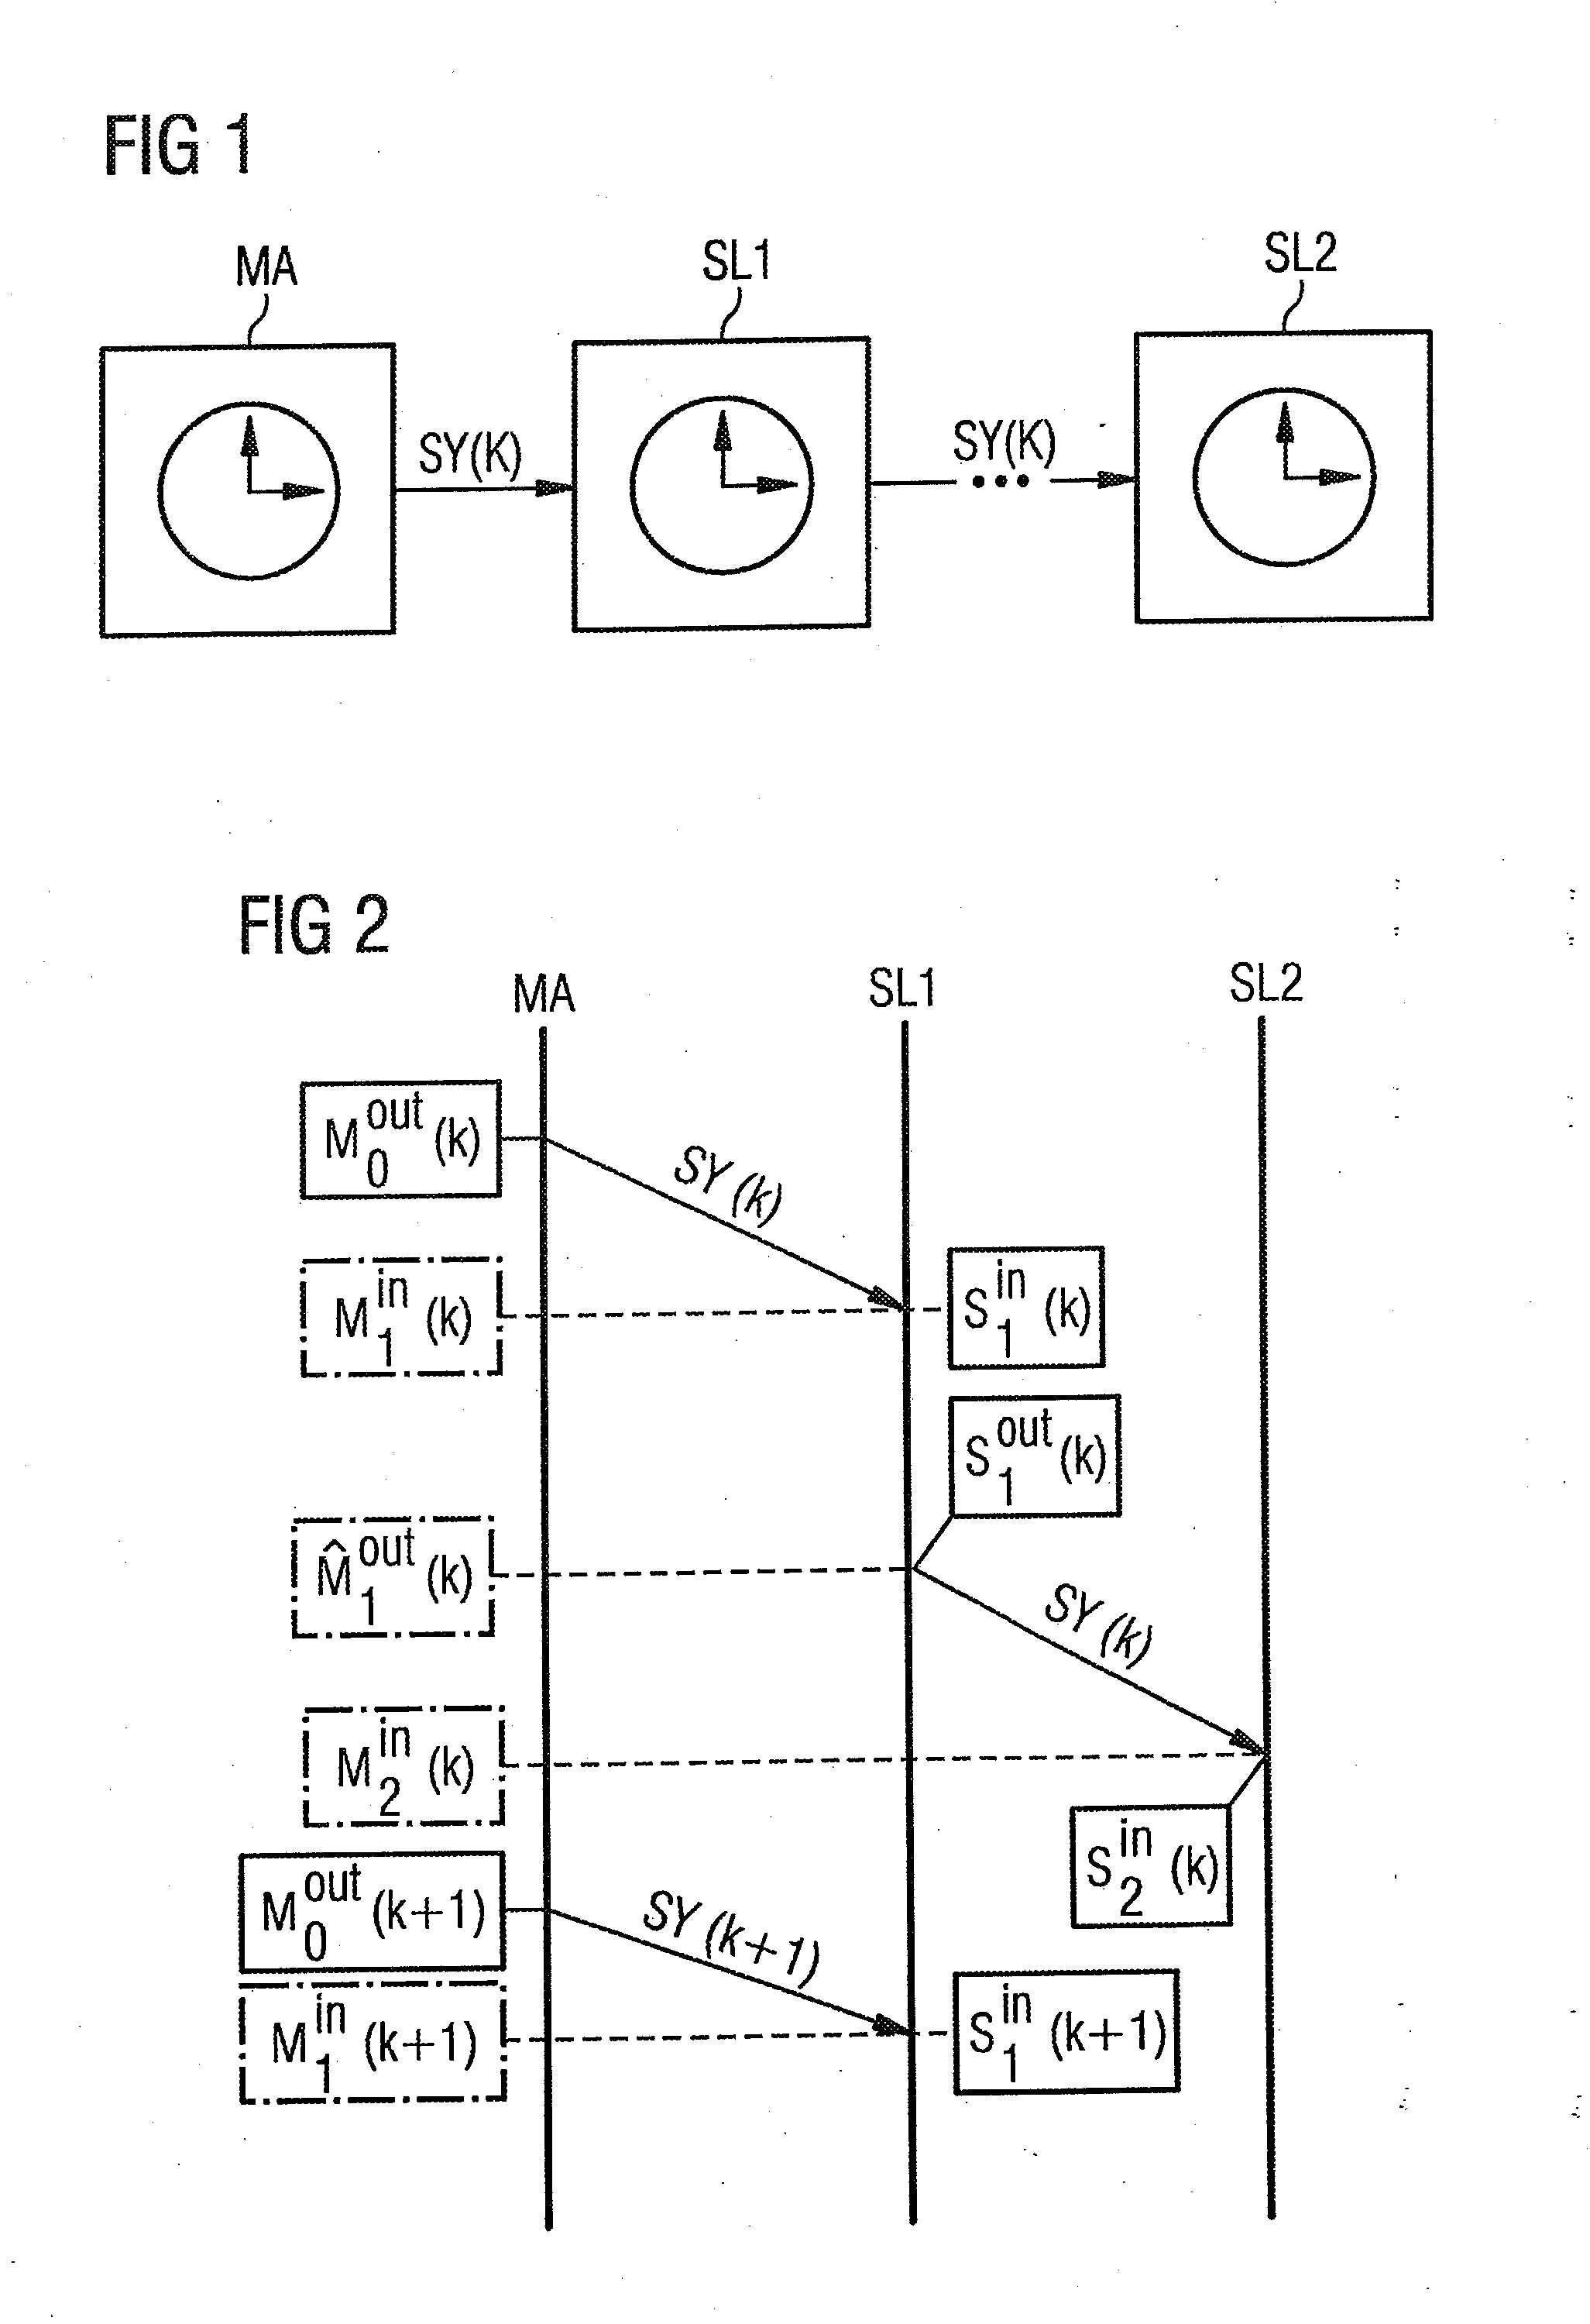 Method for Time Synchronization in a Communications Network